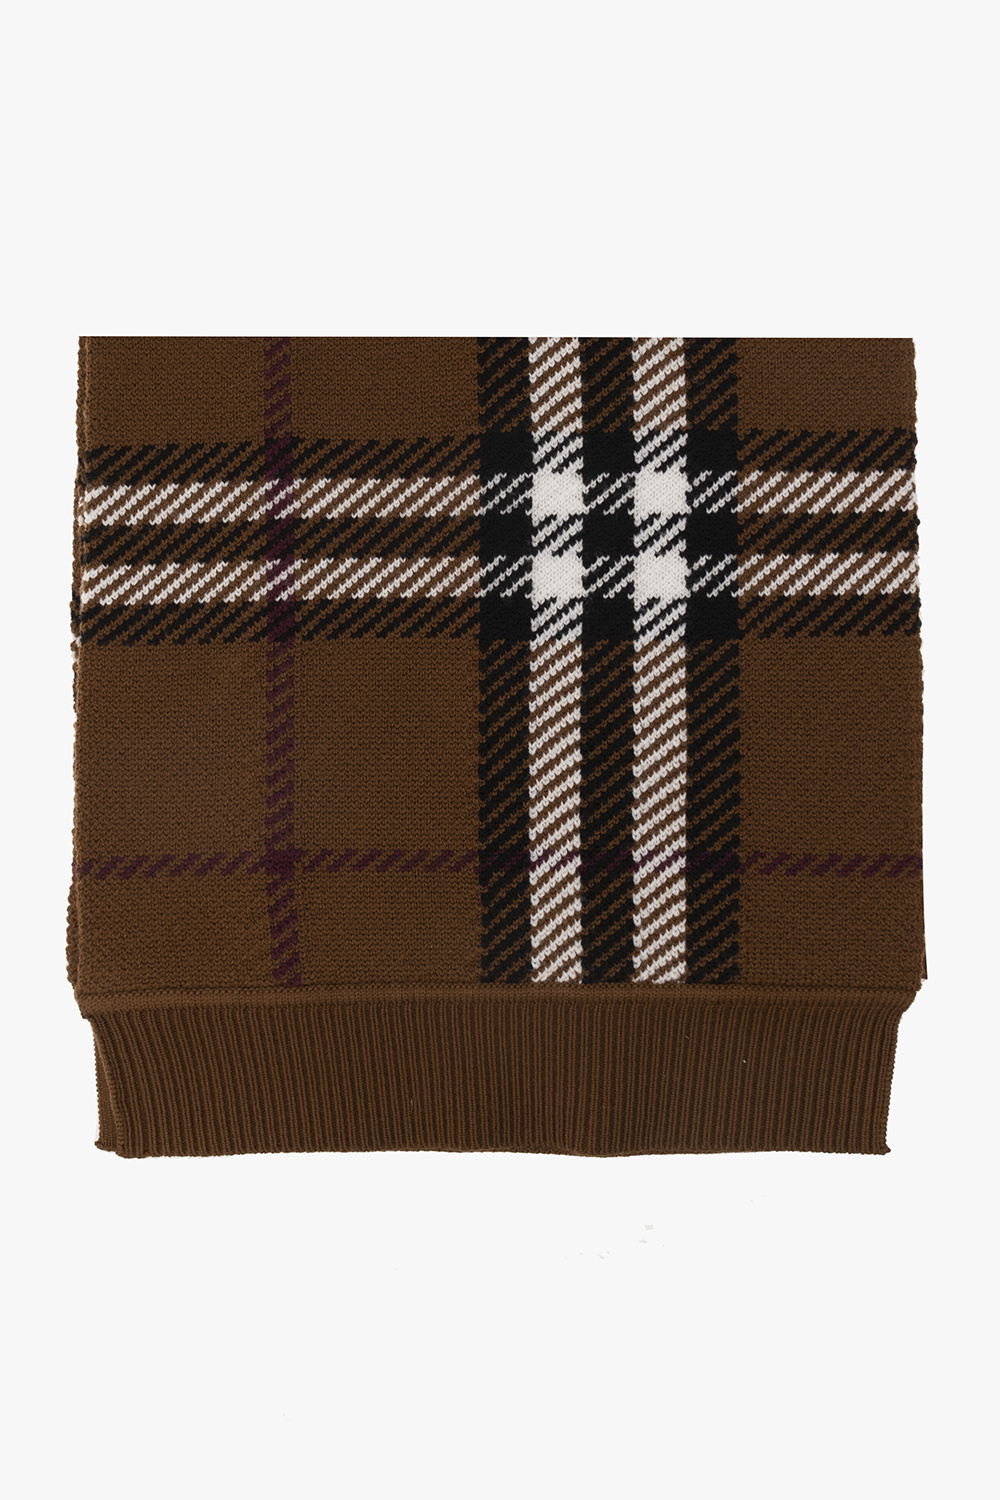 Burberry A Burberry collection is not completed without a solid range of